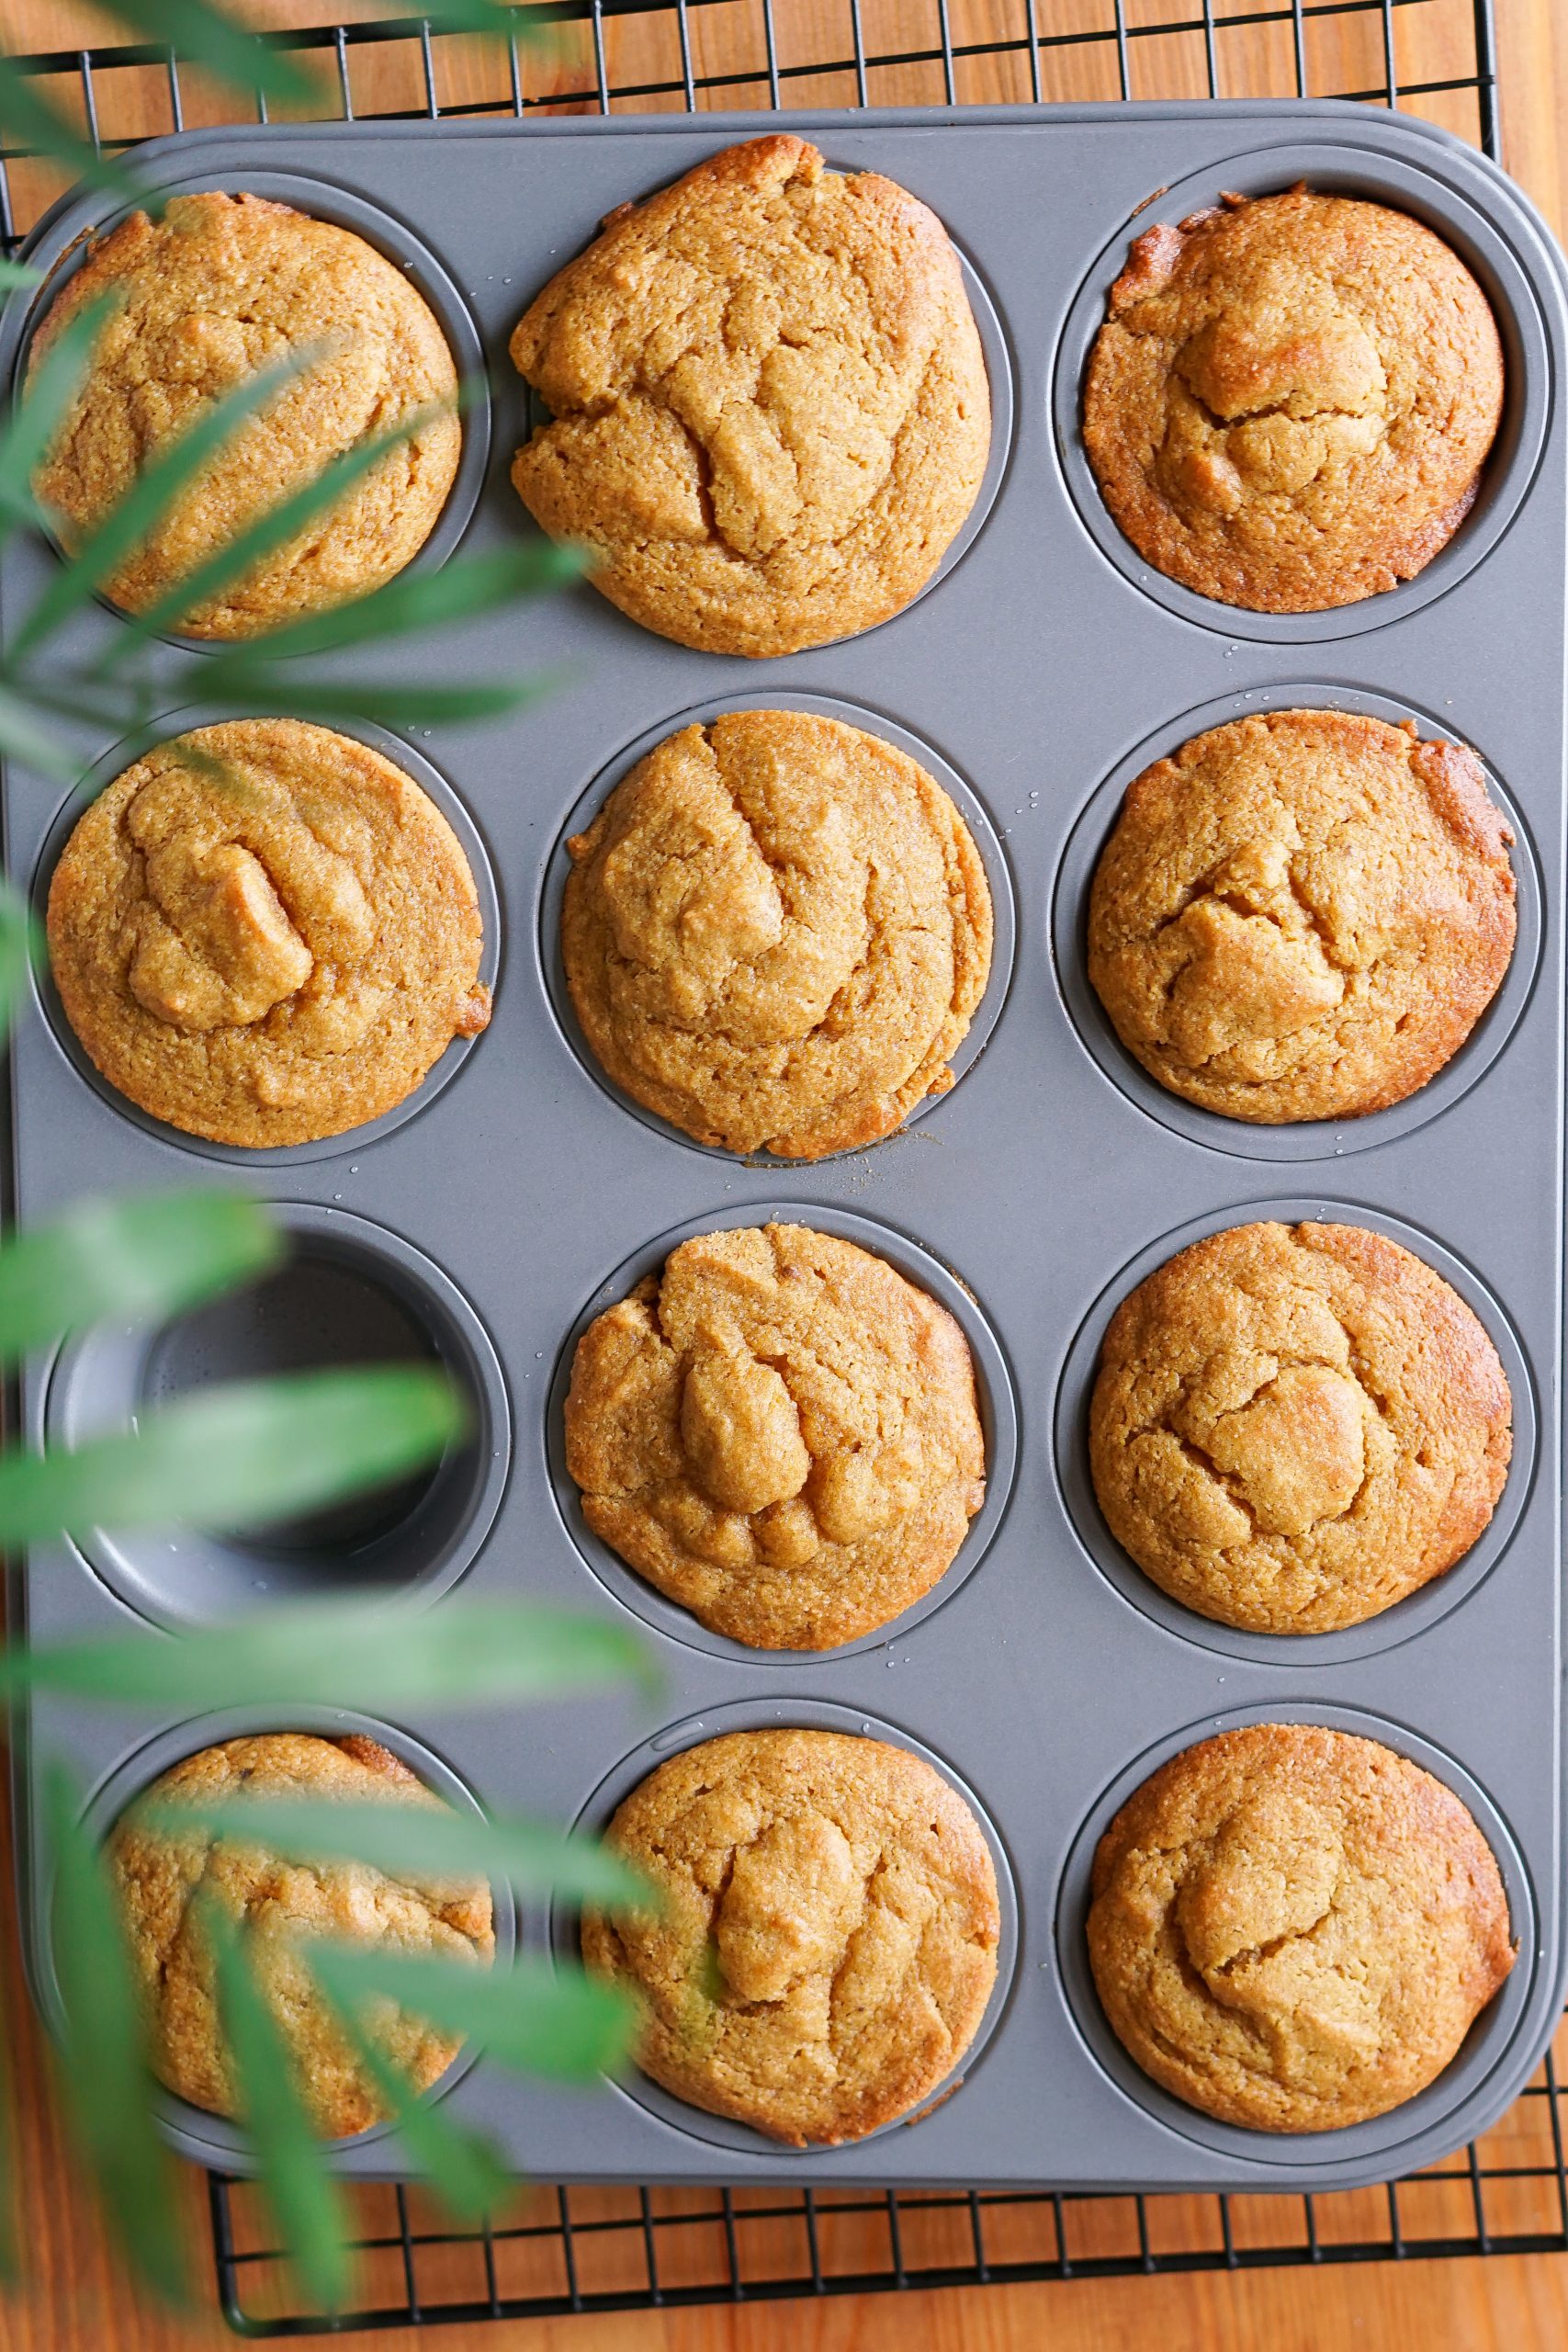  Overhead view of a muffin pan with 12 paleo and Gluten Free pumpkin muffins fresh out of the oven.